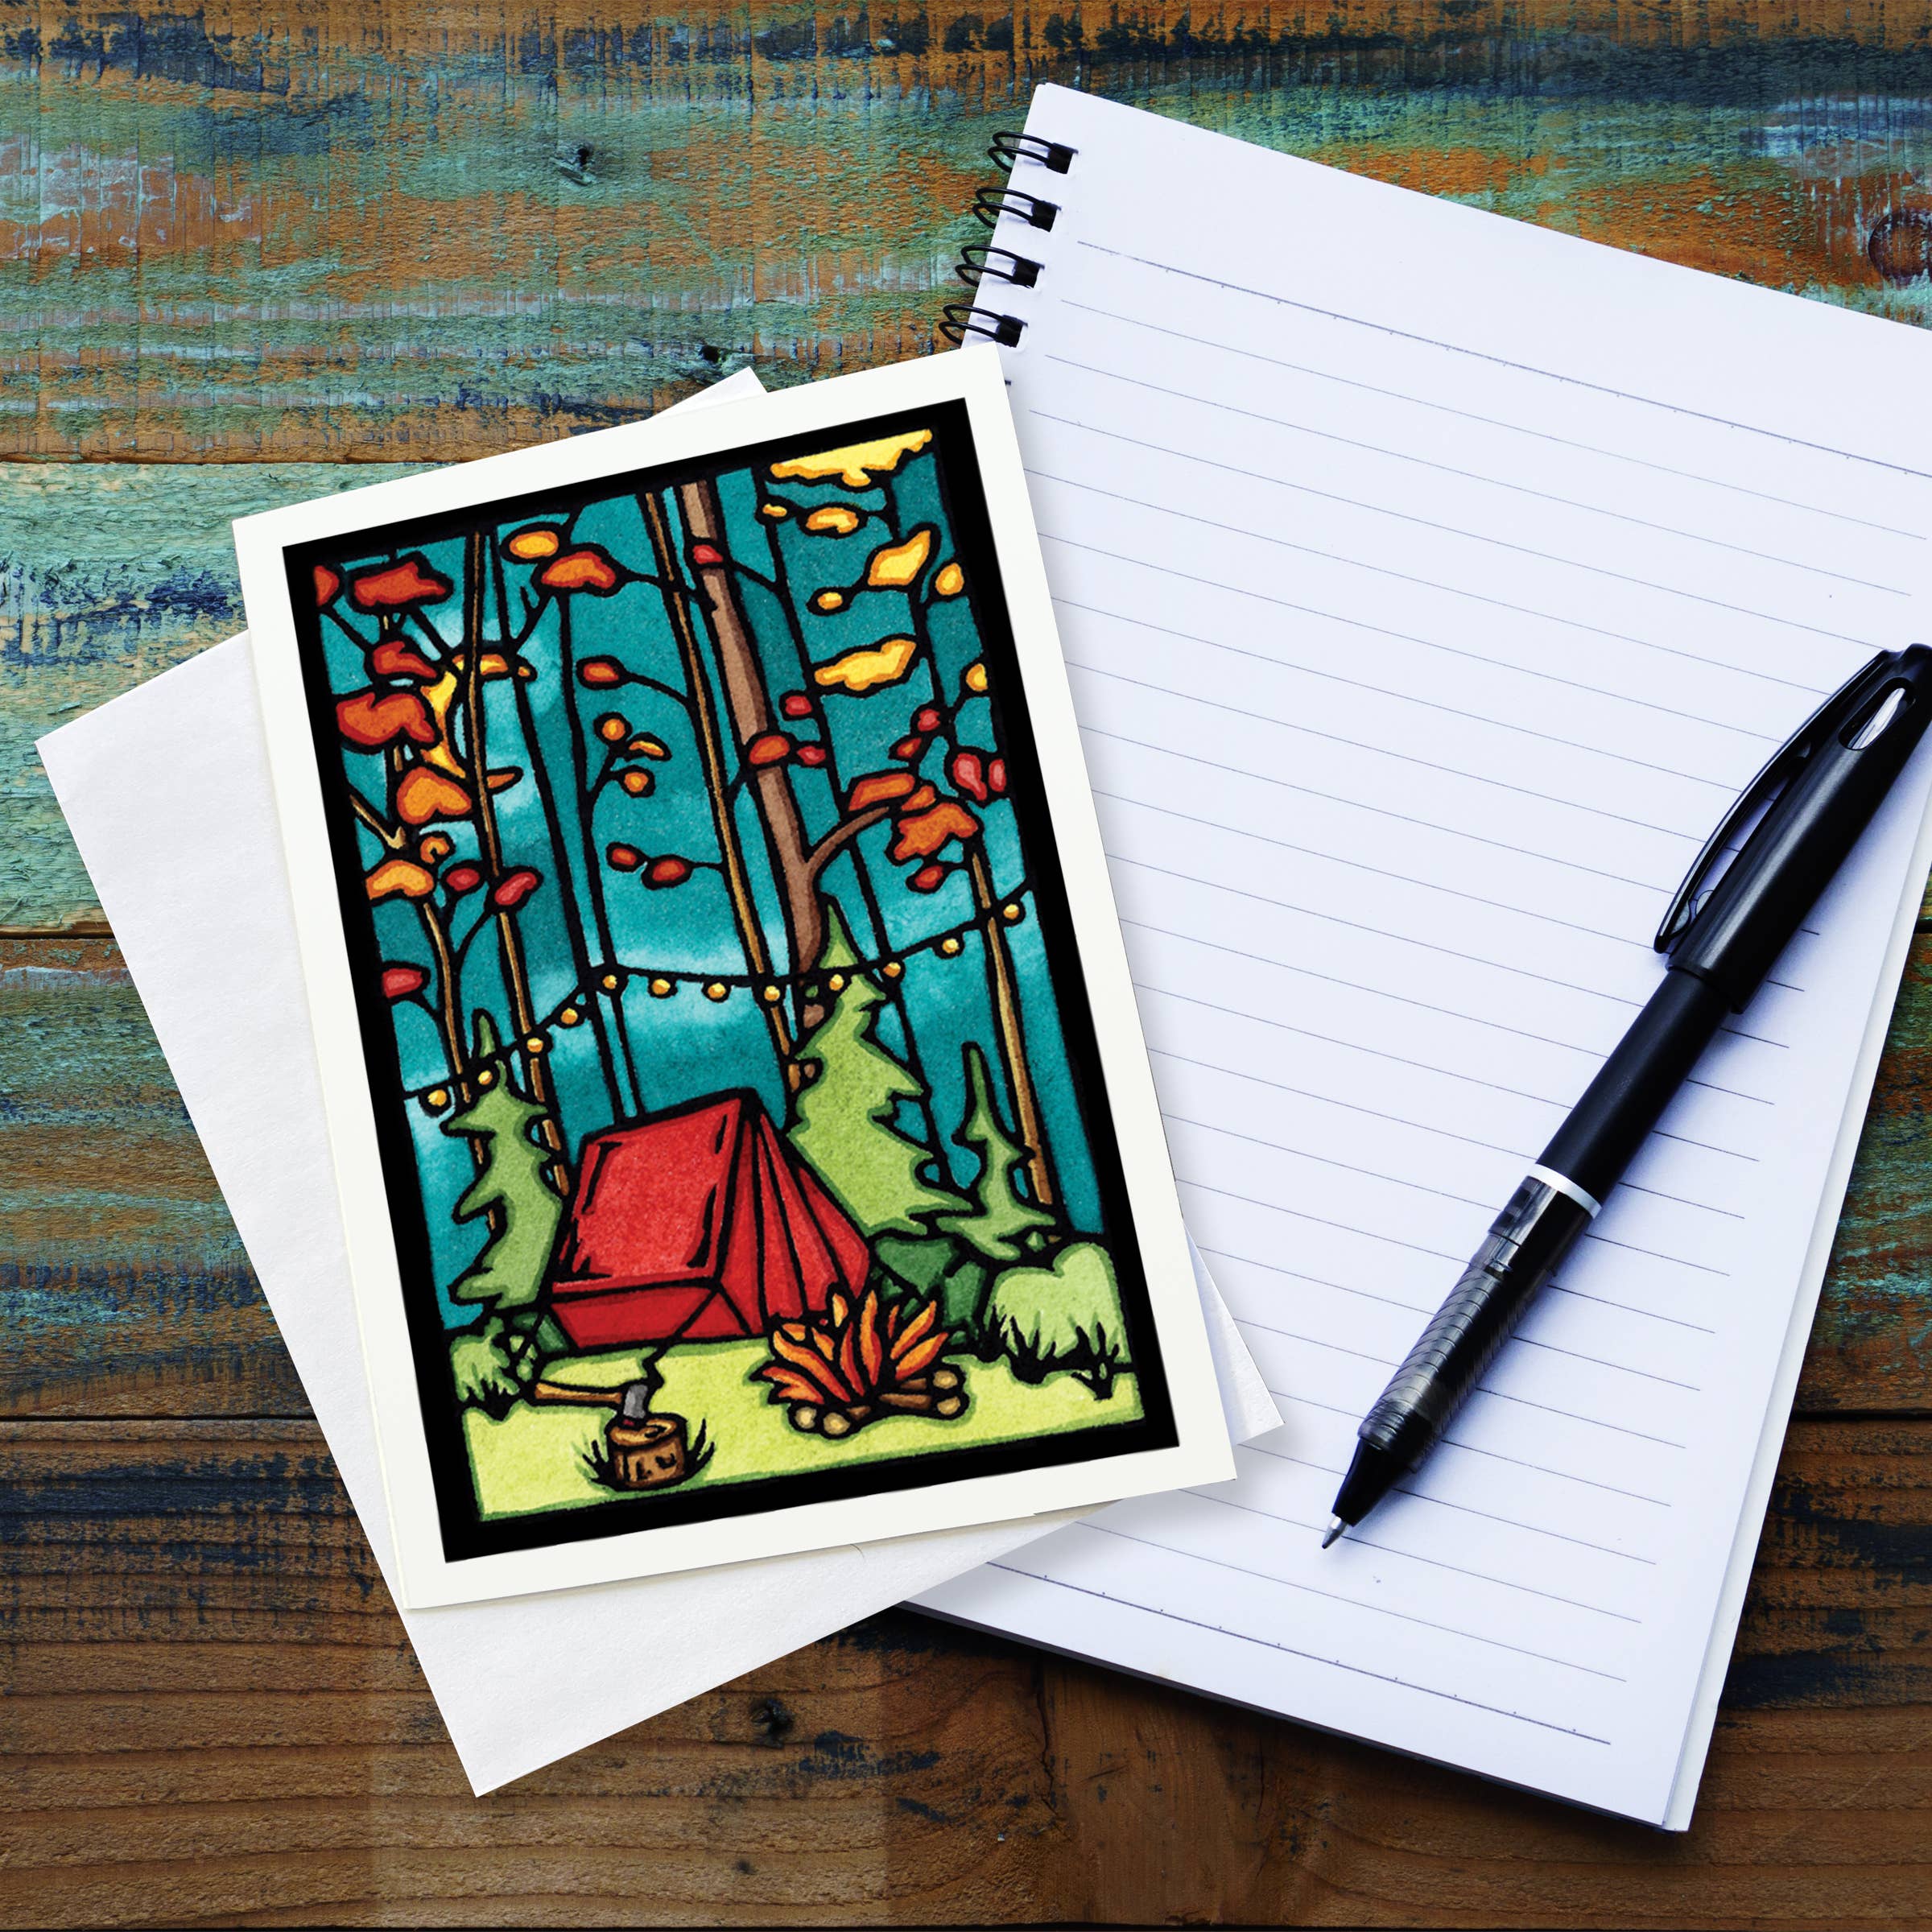 Greeting Card: Evening at Camp Tent by Sarah Angst